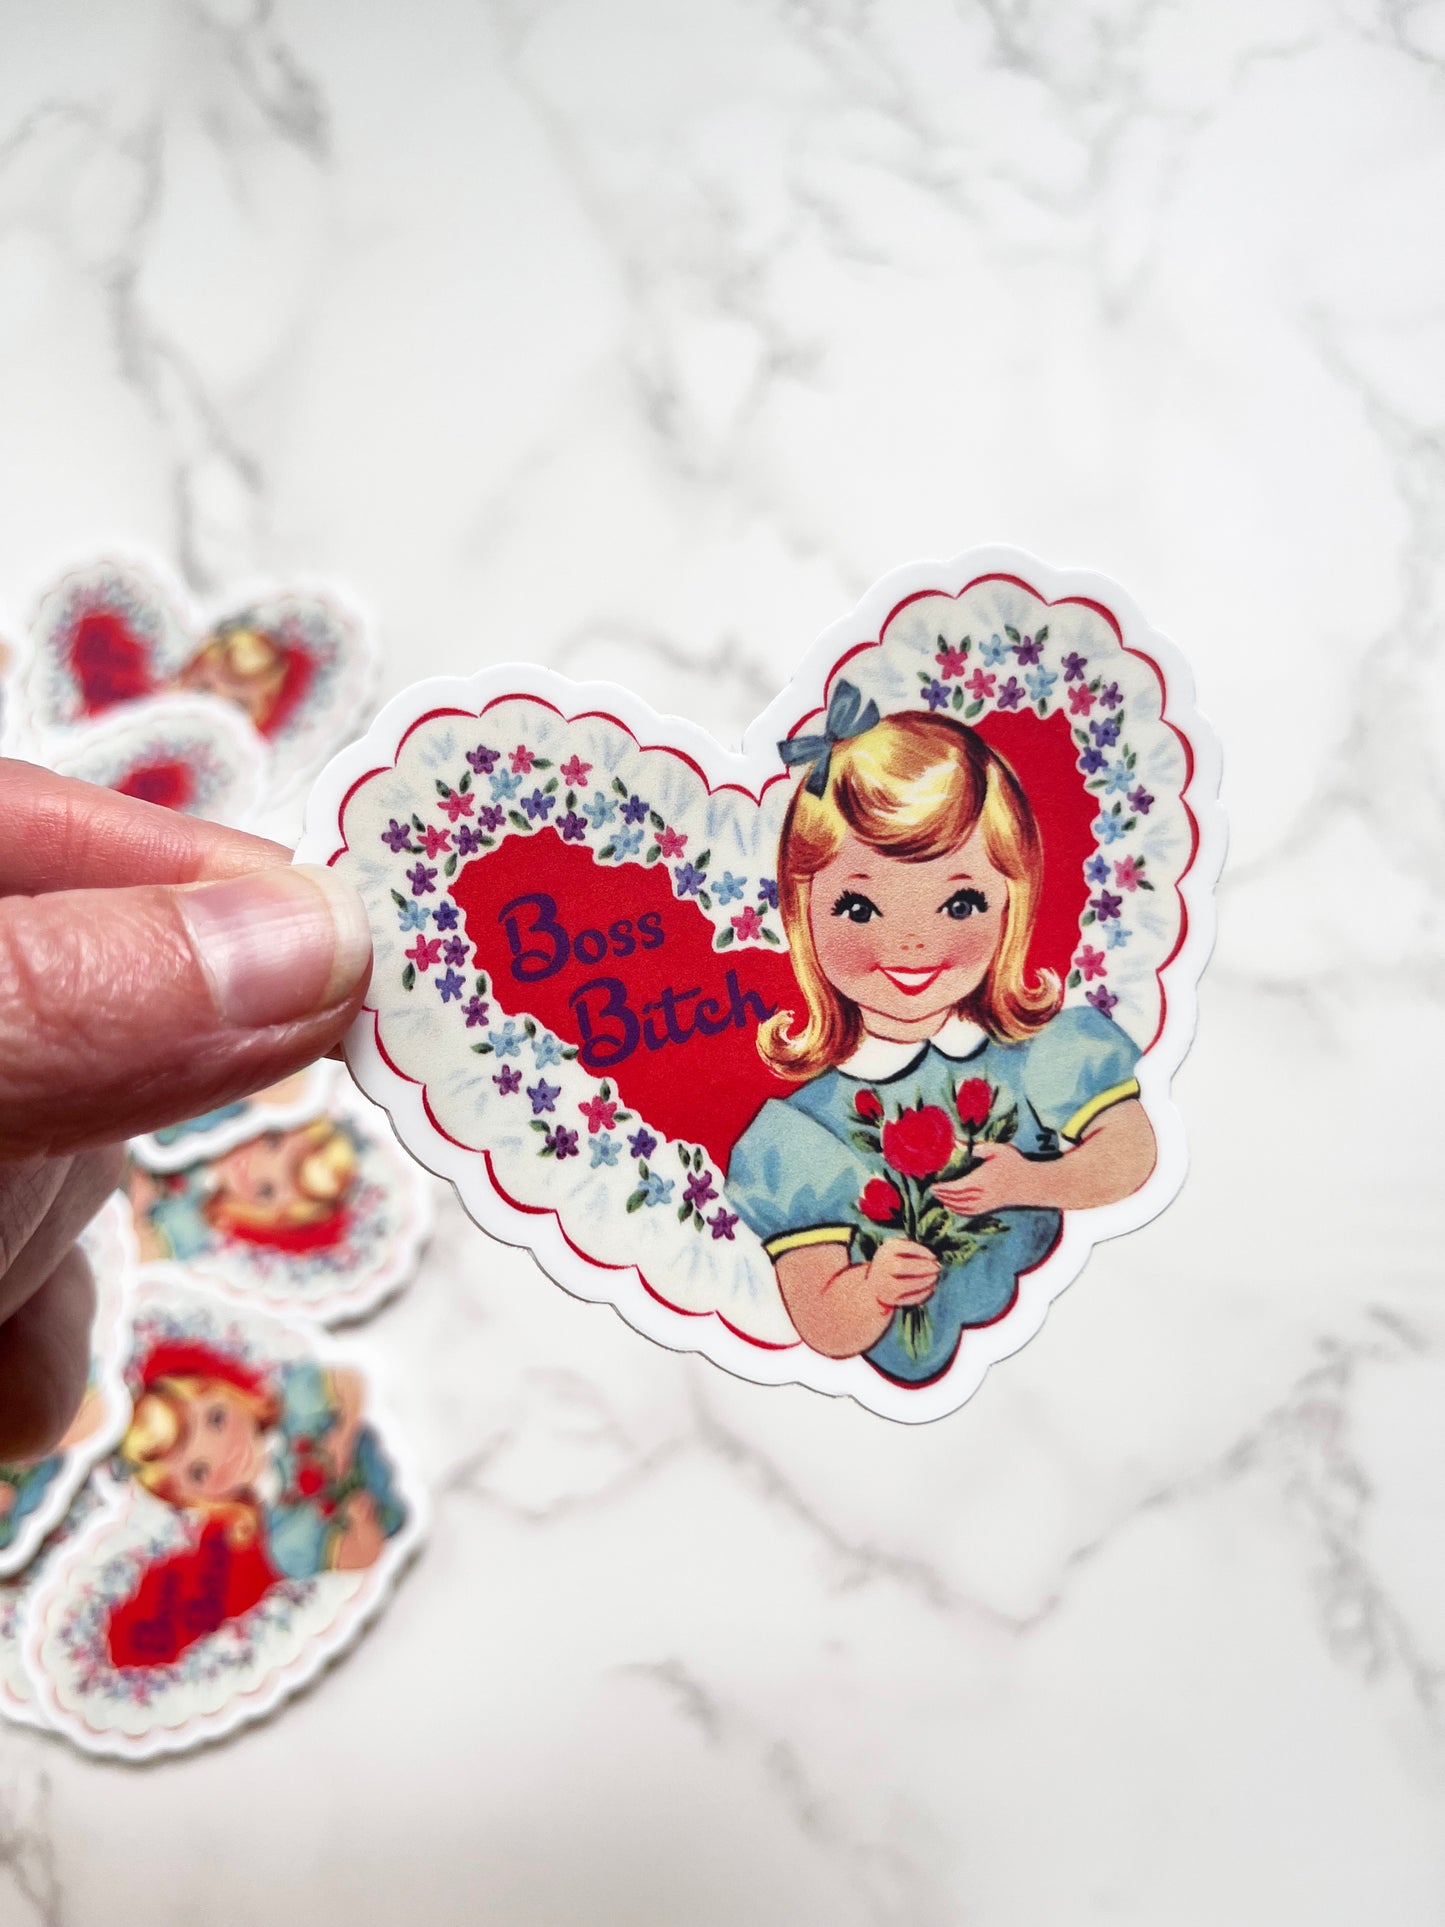 best sticker boss bitch funny decal with vintage aesthetic girl flowers and heart shaped cute coin laundry sticker 